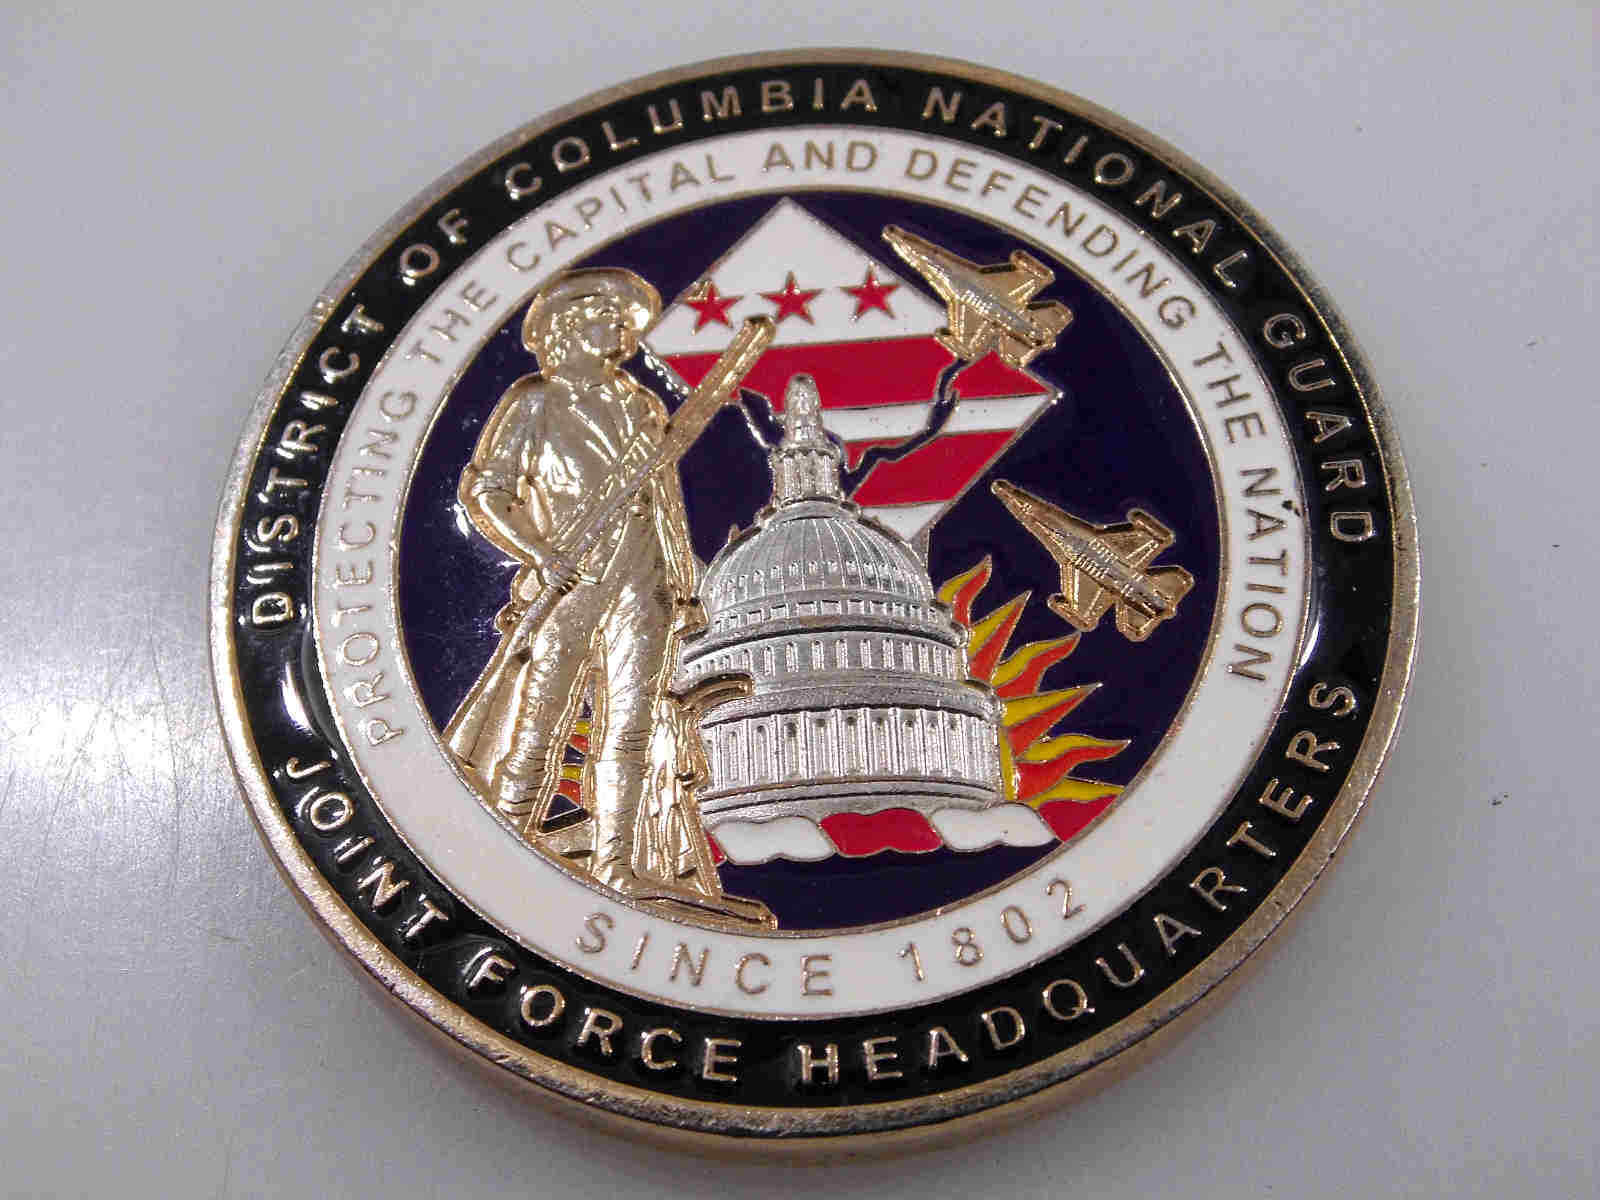 DISTRICT OF COLUMBIA NATIONAL GUARD JOINT FORCE HEADQUARTERS CHALLENGE COIN